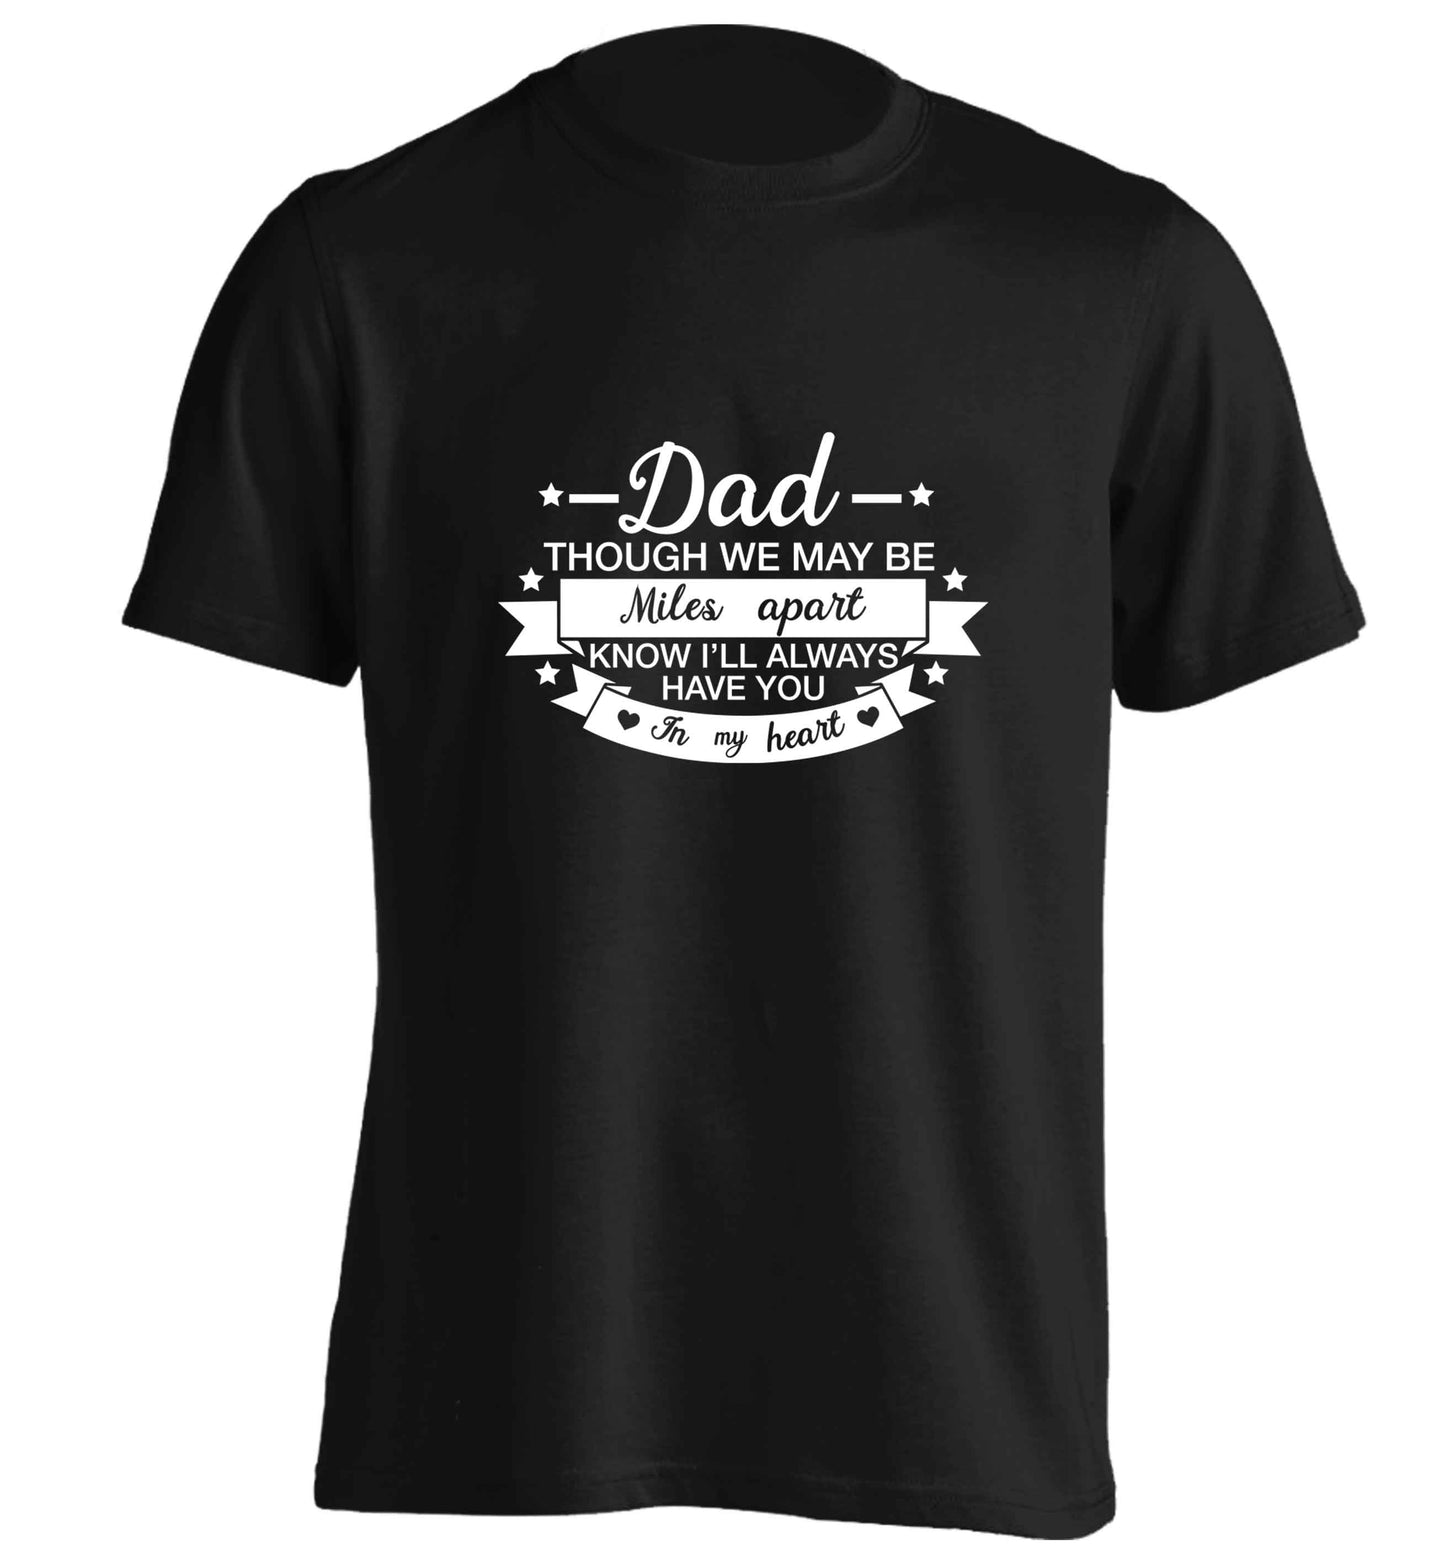 Dad though we are miles apart know I'll always have you in my heart adults unisex black Tshirt 2XL